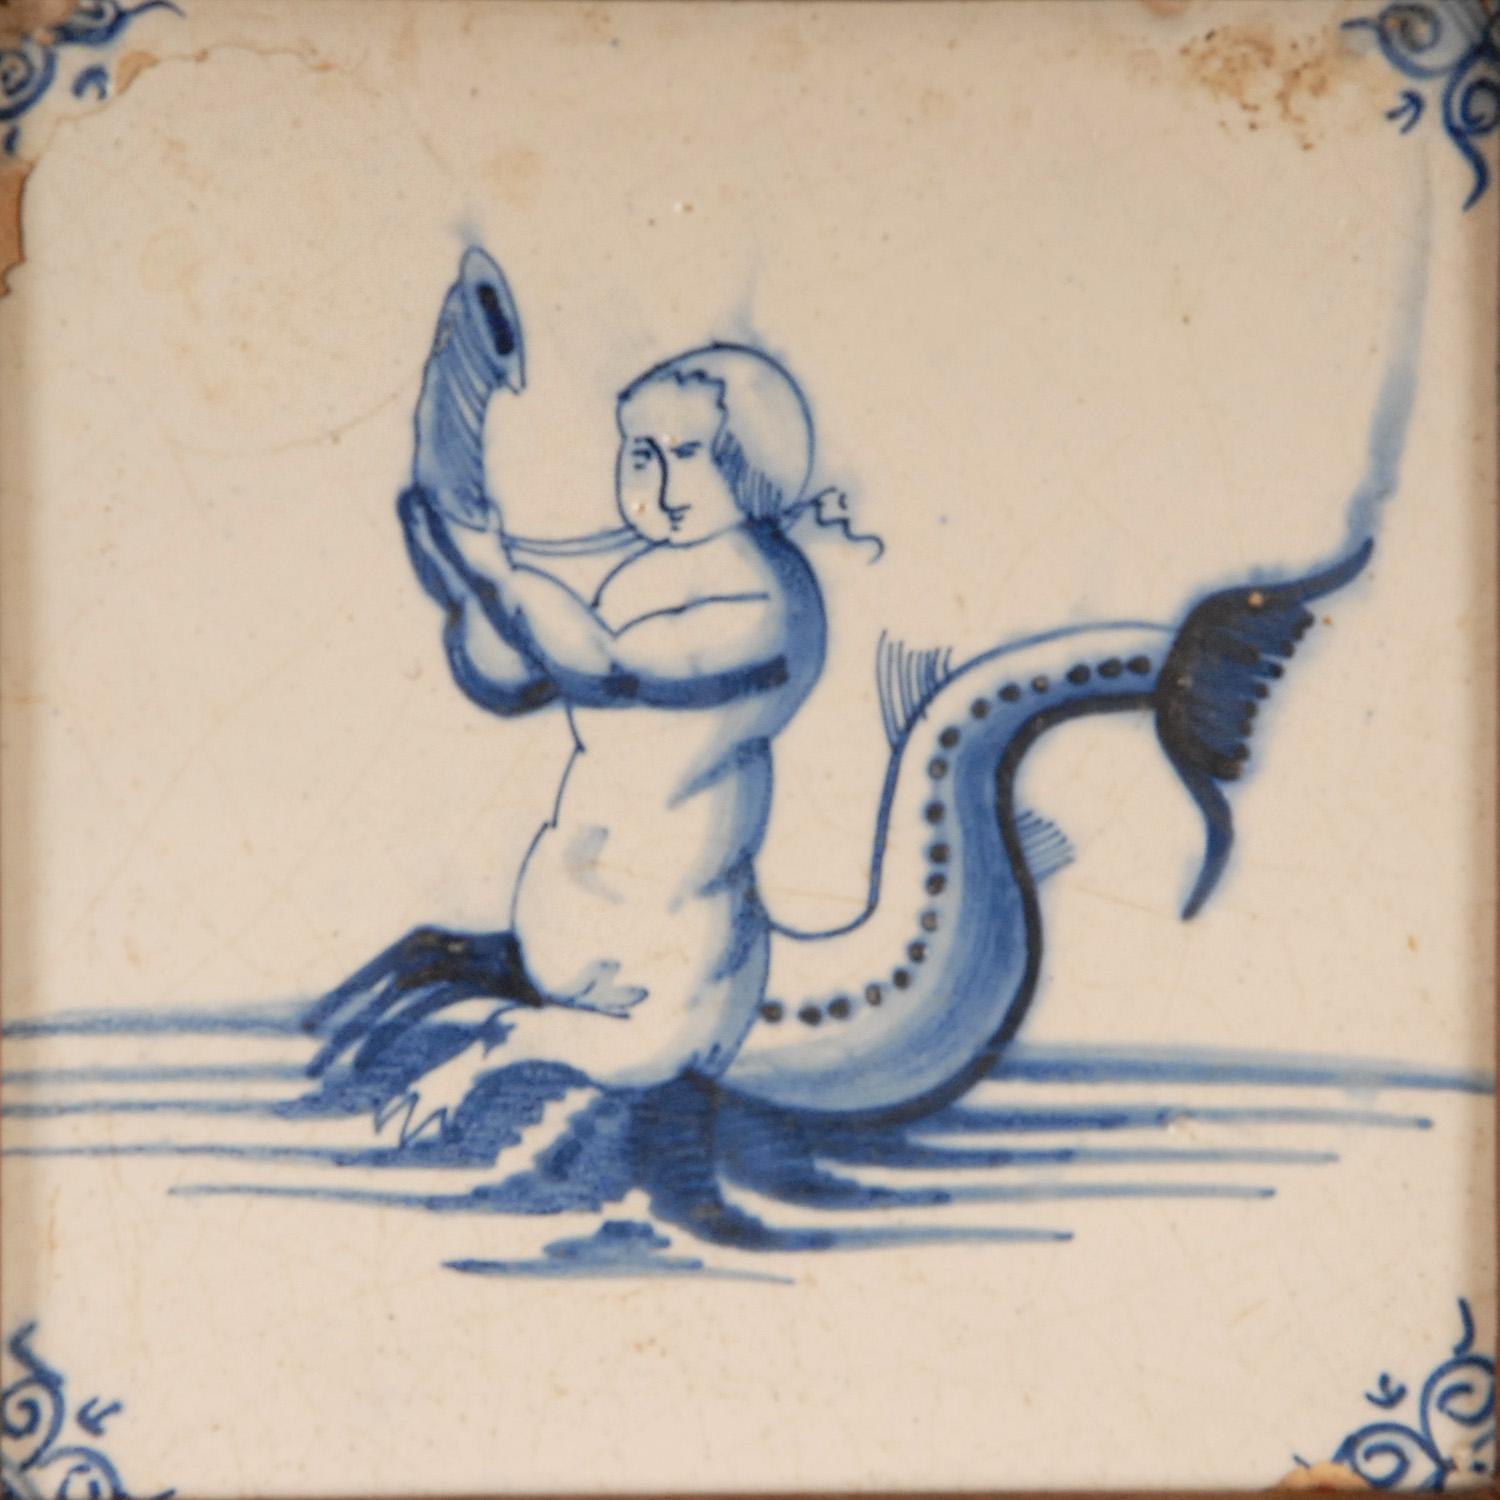 17th - 18th century Dutch Delft Tiles
Oak framed blue and white tiles.
Depicting mermaids and seacreatures
Design: In the manner of Royal Delft, AK Dutch Delftware
Style, Antique, Baroque, Louis XIV, 17th century / 18th century
Description: a set of